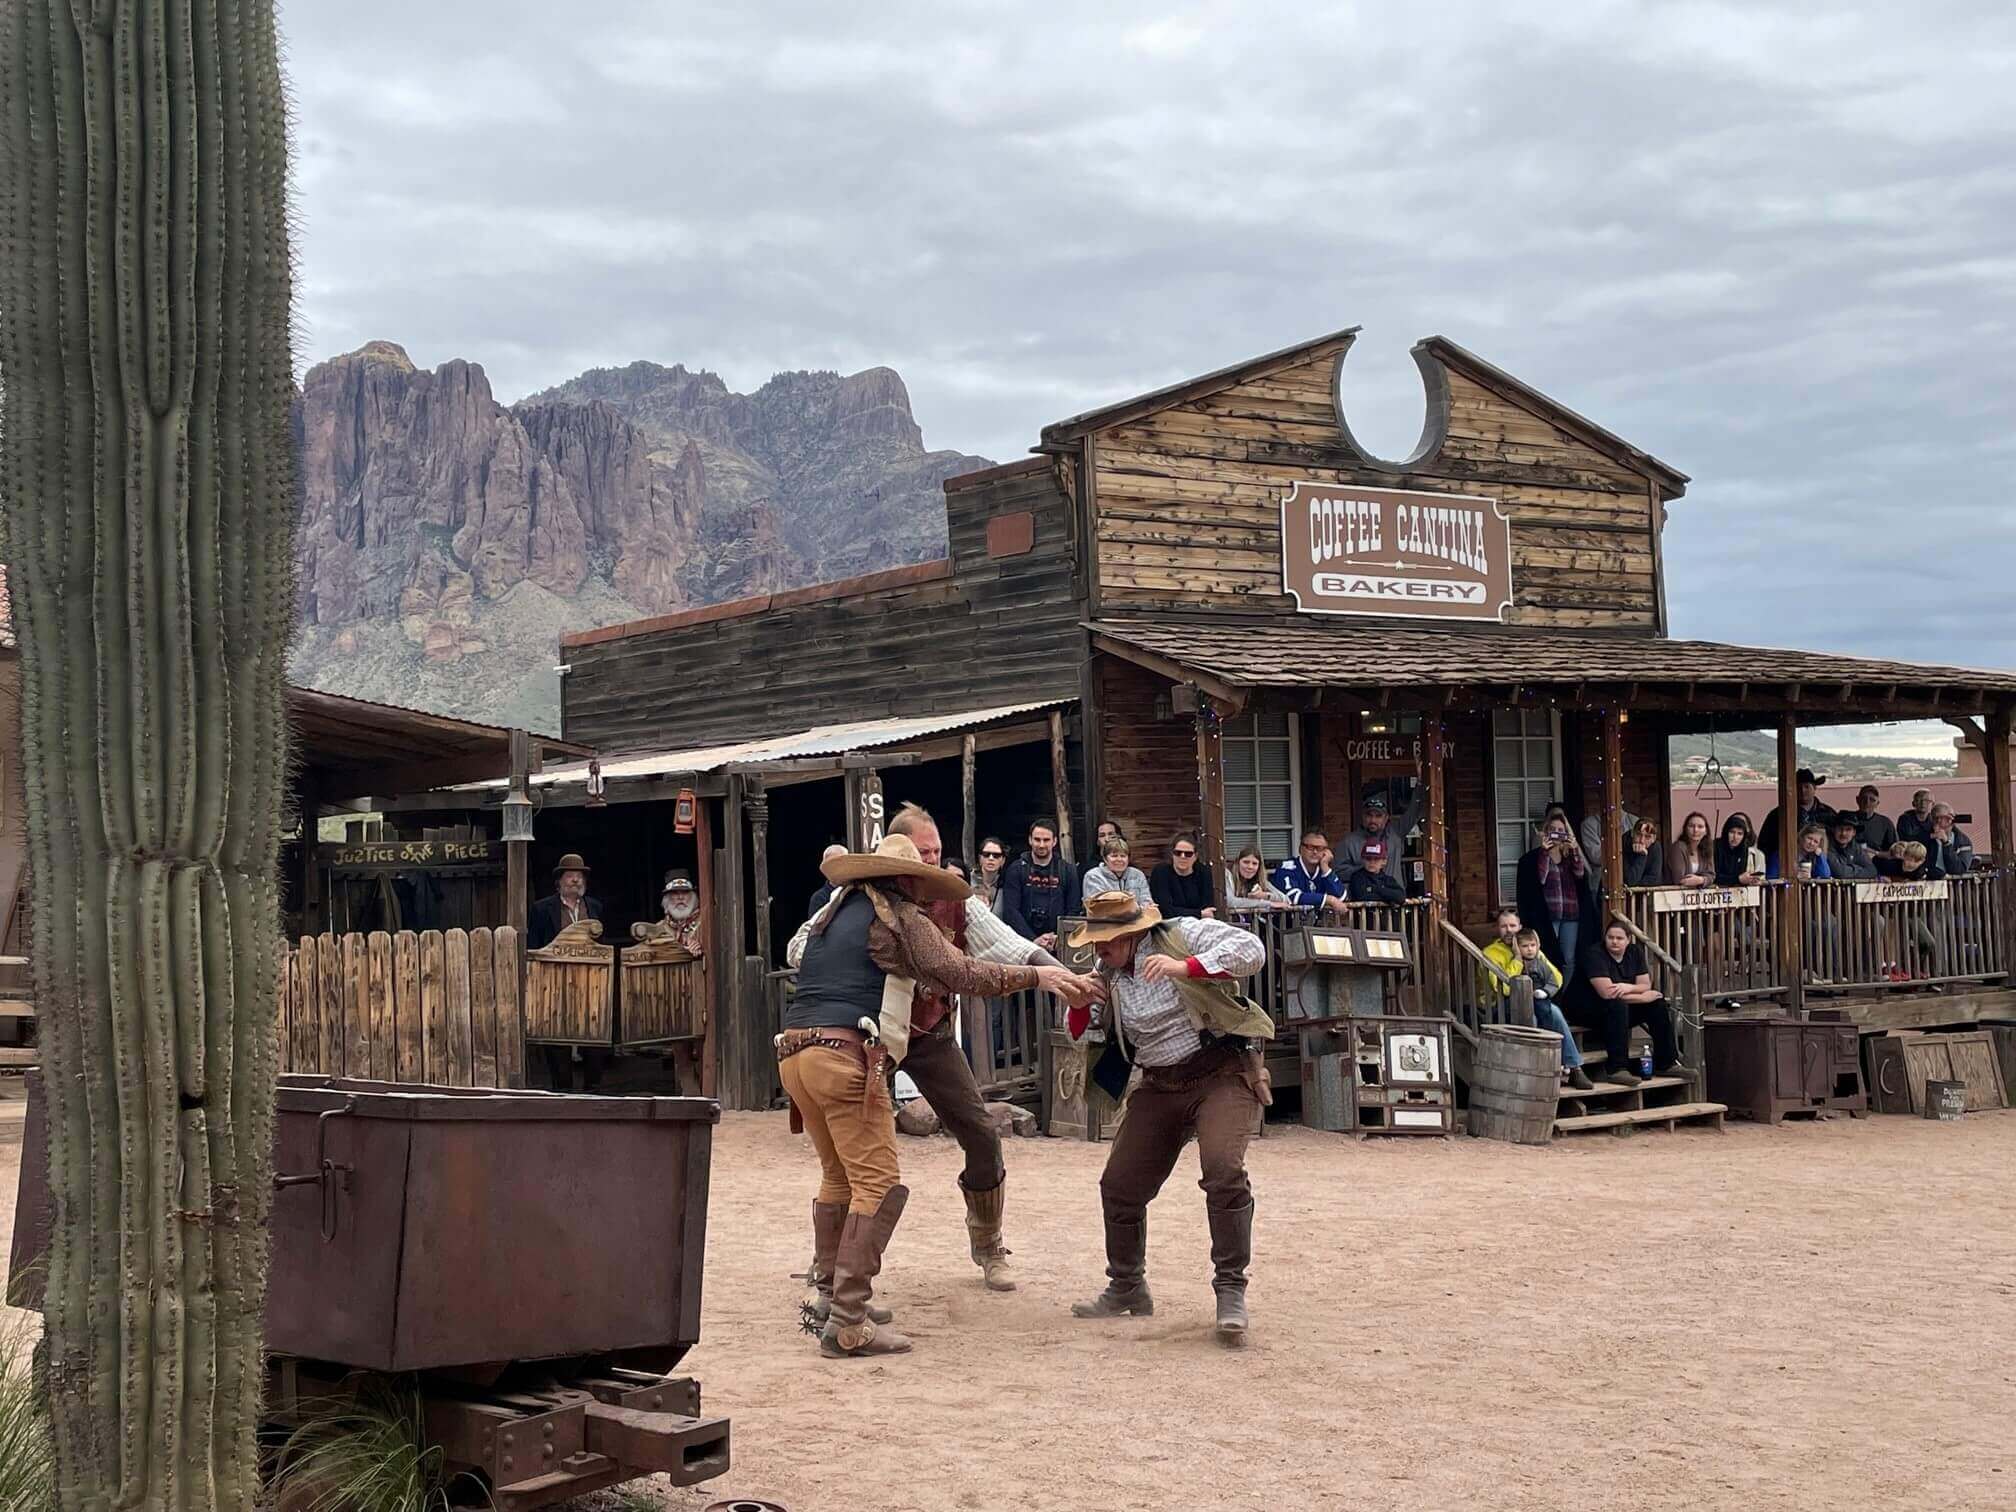 Actors reenact a western shootout during a day trip to Goldfield ghost town.